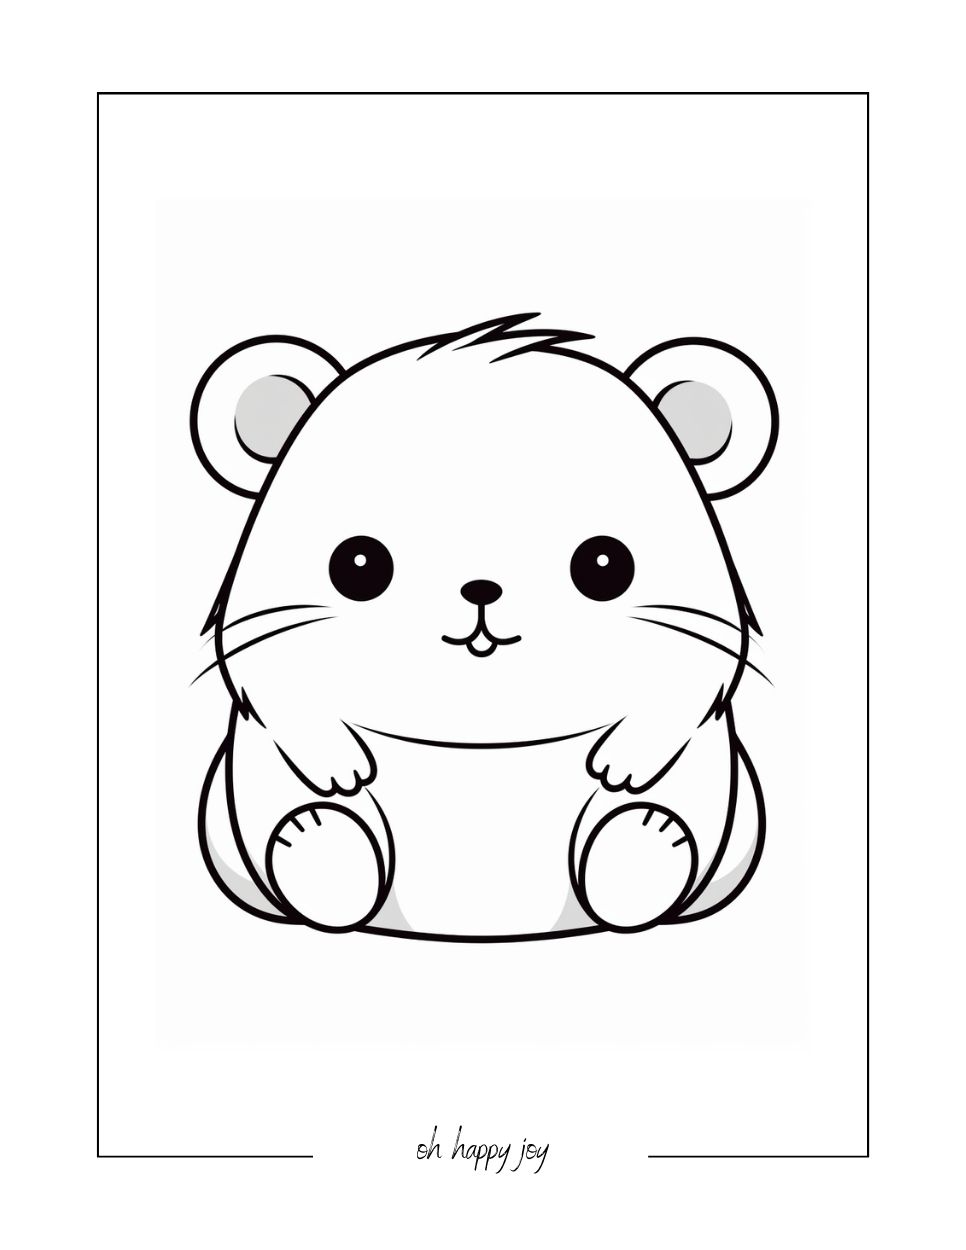 Tiny squishmallow free coloring sheet